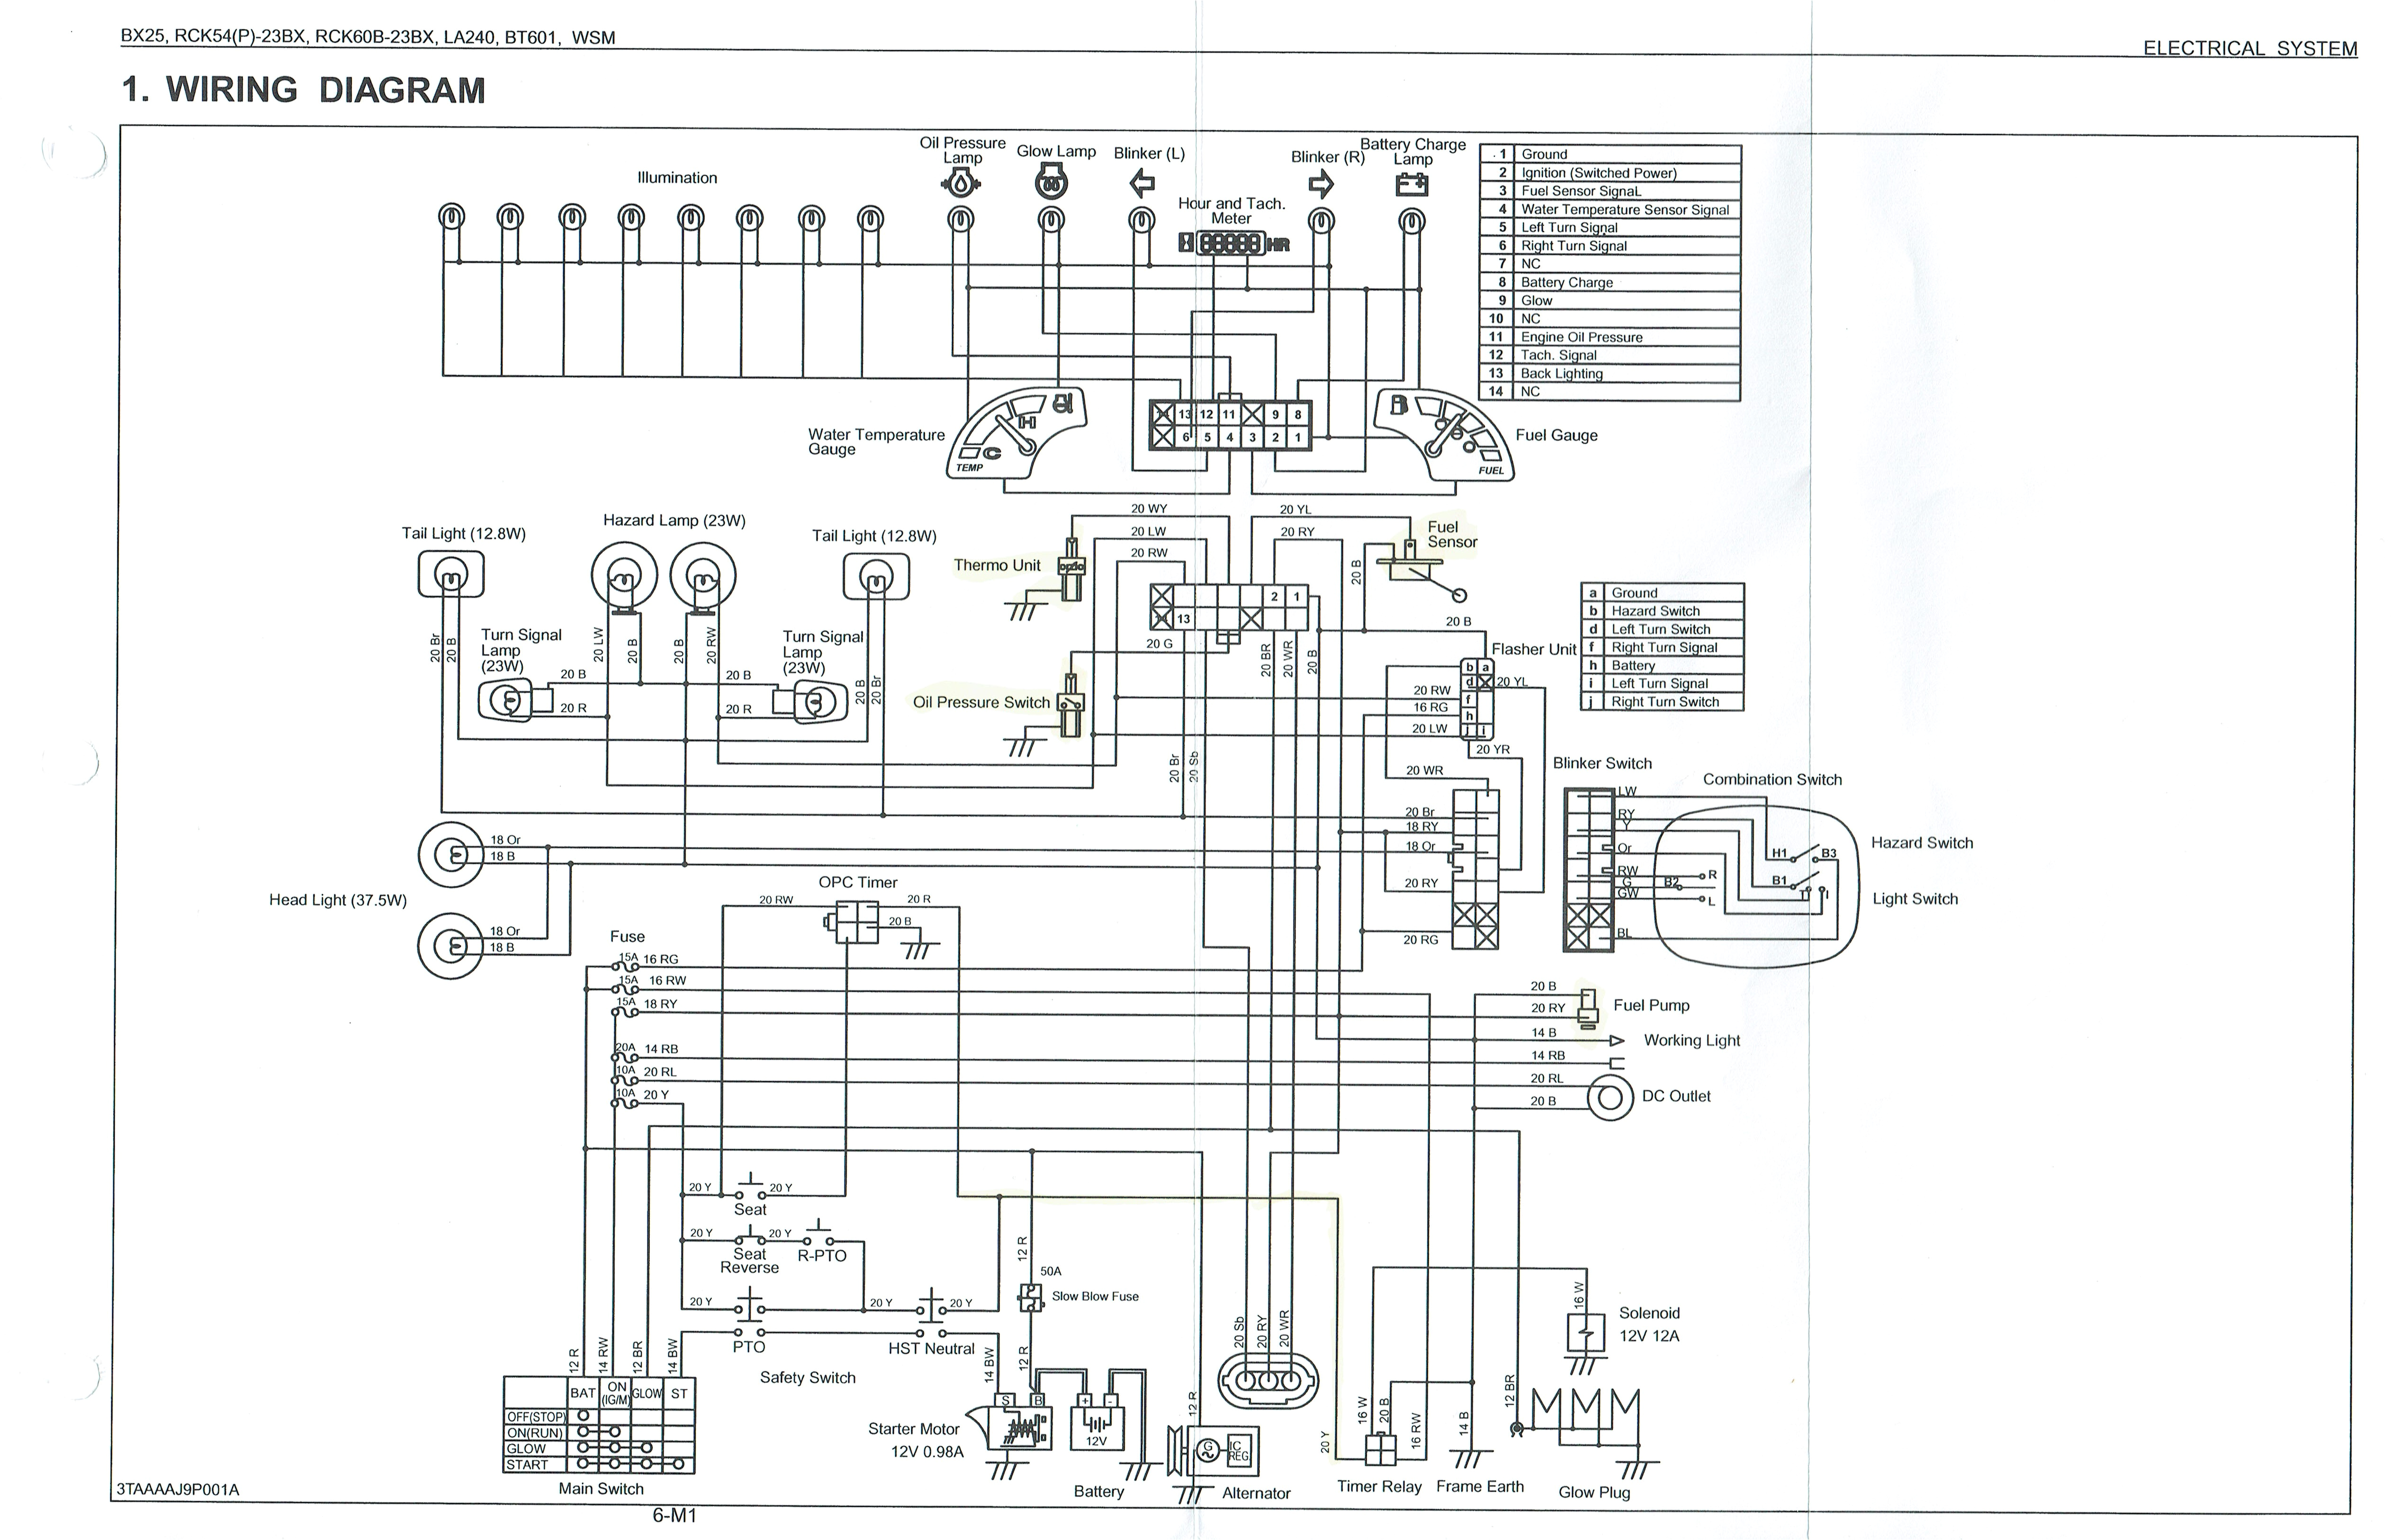 need help troubleshooting fuel shut off system on bx24 kubota tractor kill relay wiring diagrams